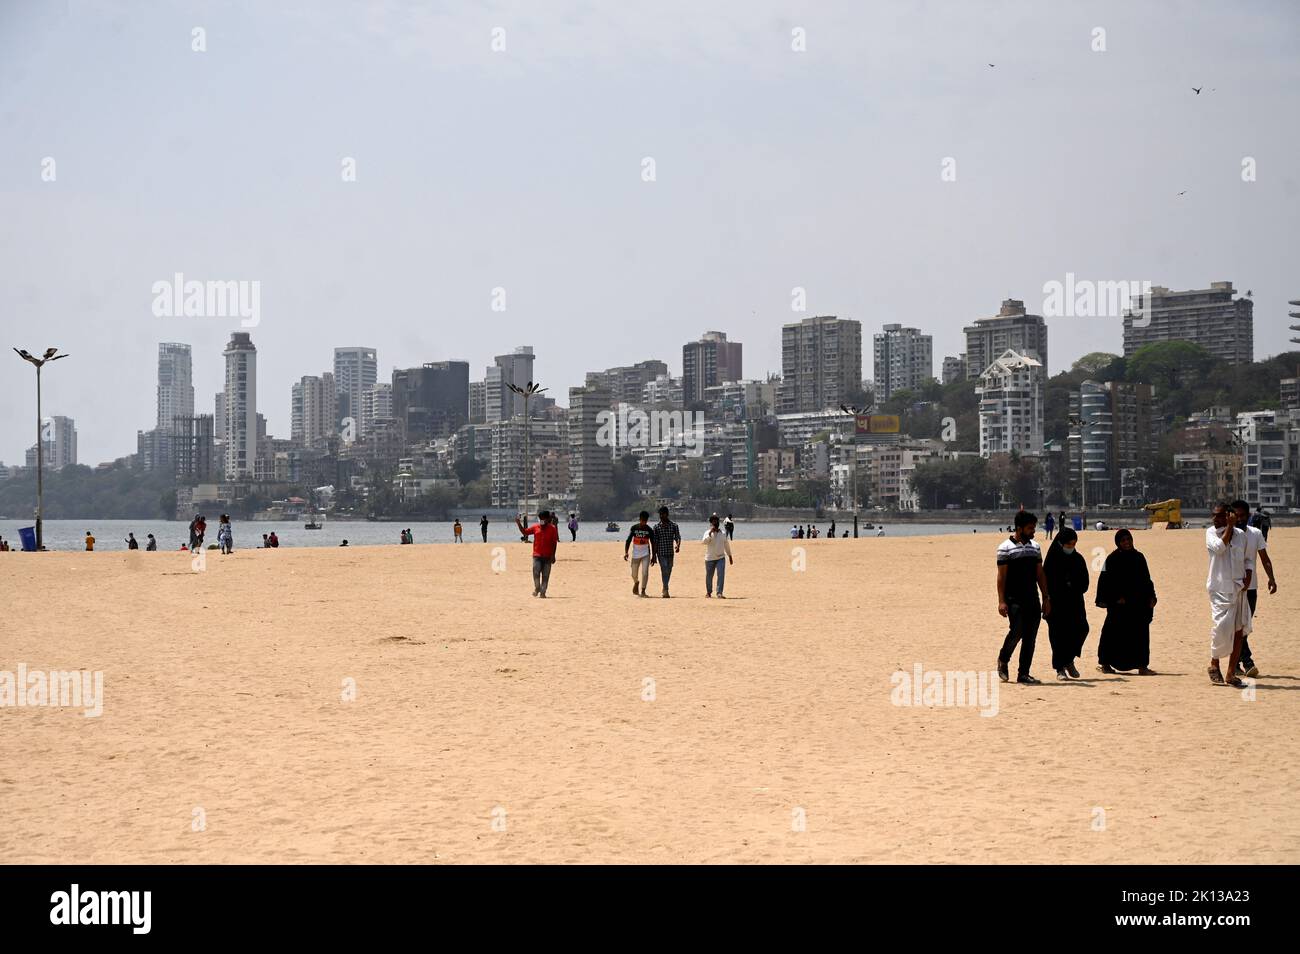 People including Muslims strolling on Juhu beach, high rise city buildings in the background, Mumbai, India, Asia Stock Photo